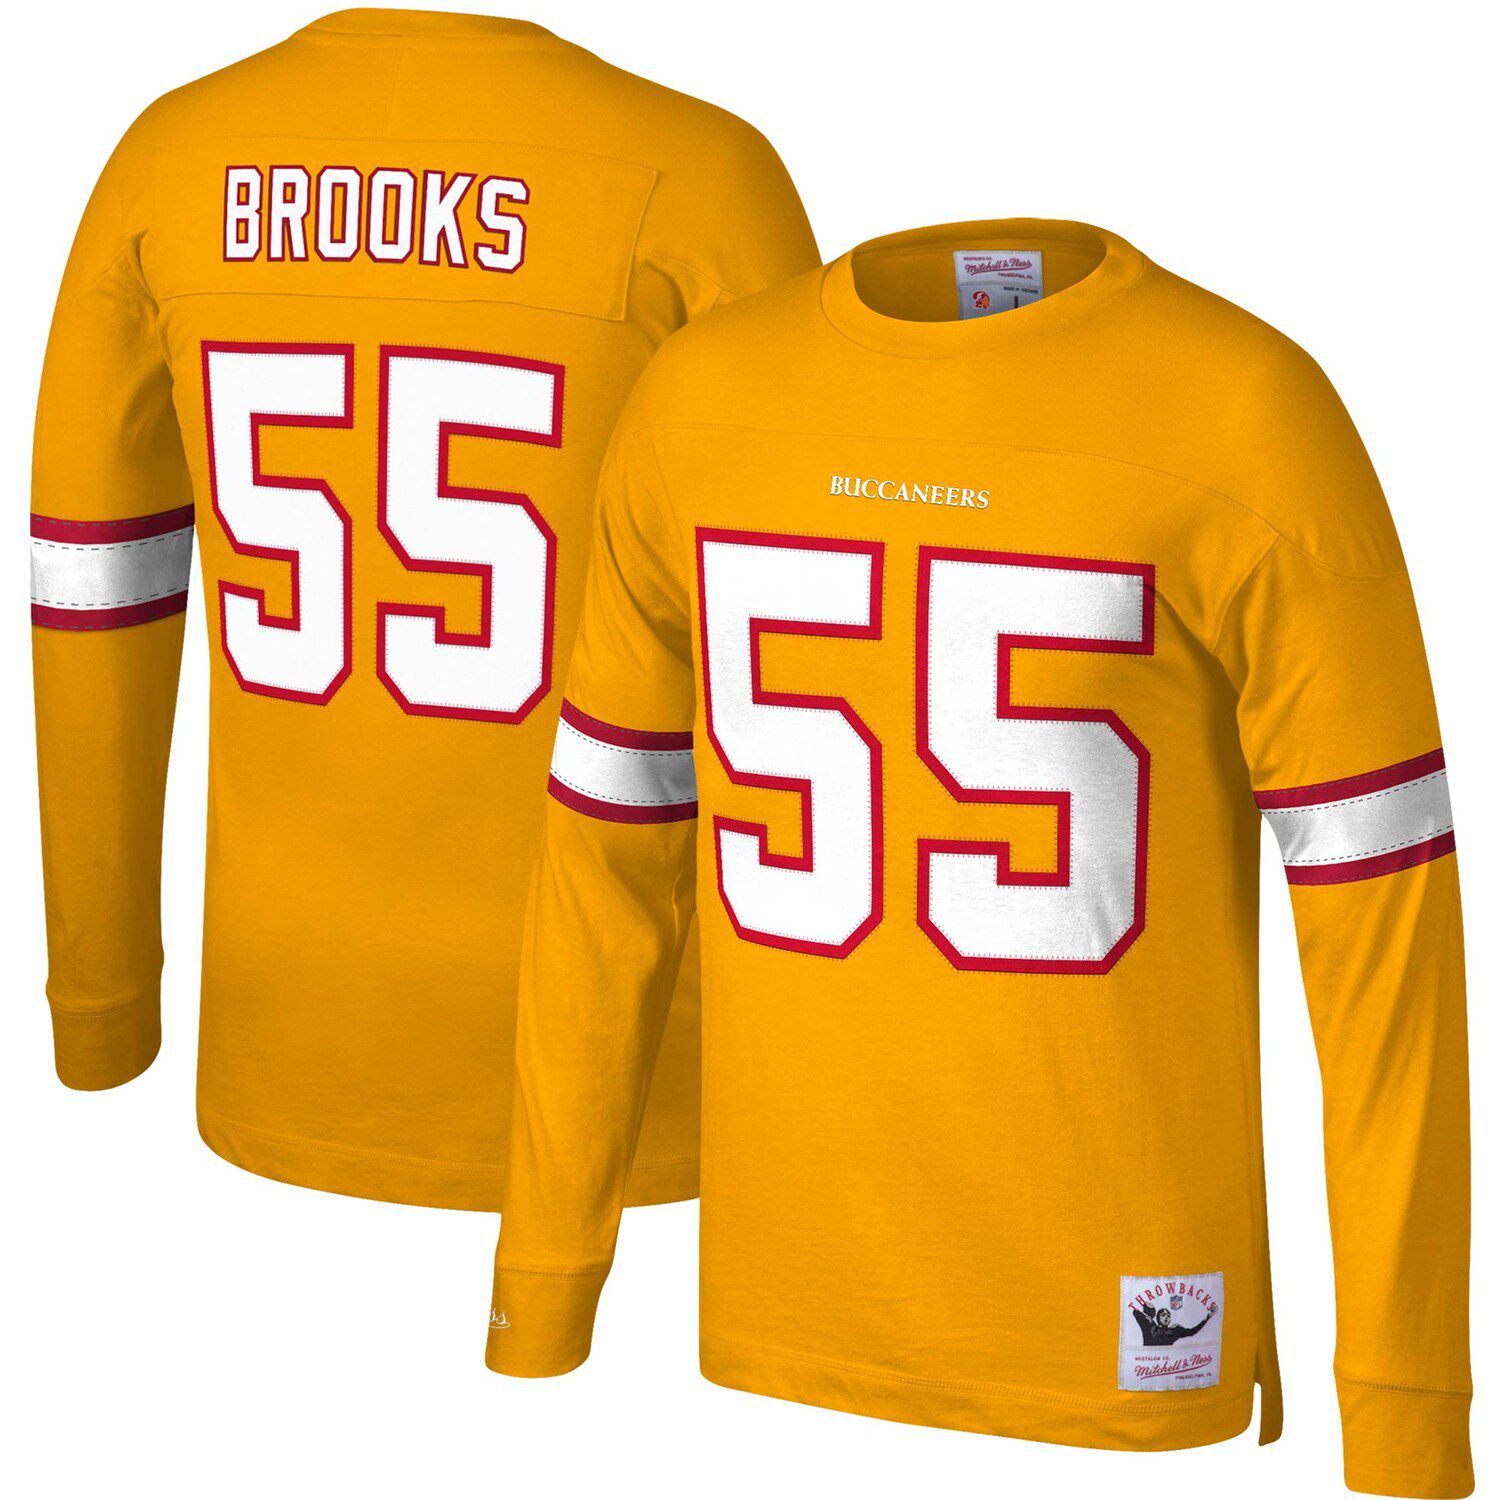 Image for Unbranded Men's Mitchell & Ness Derrick Brooks Orange Tampa Bay Buccaneers Throwback Retired Player Name & Number Long Sleeve Top at Kohl's.